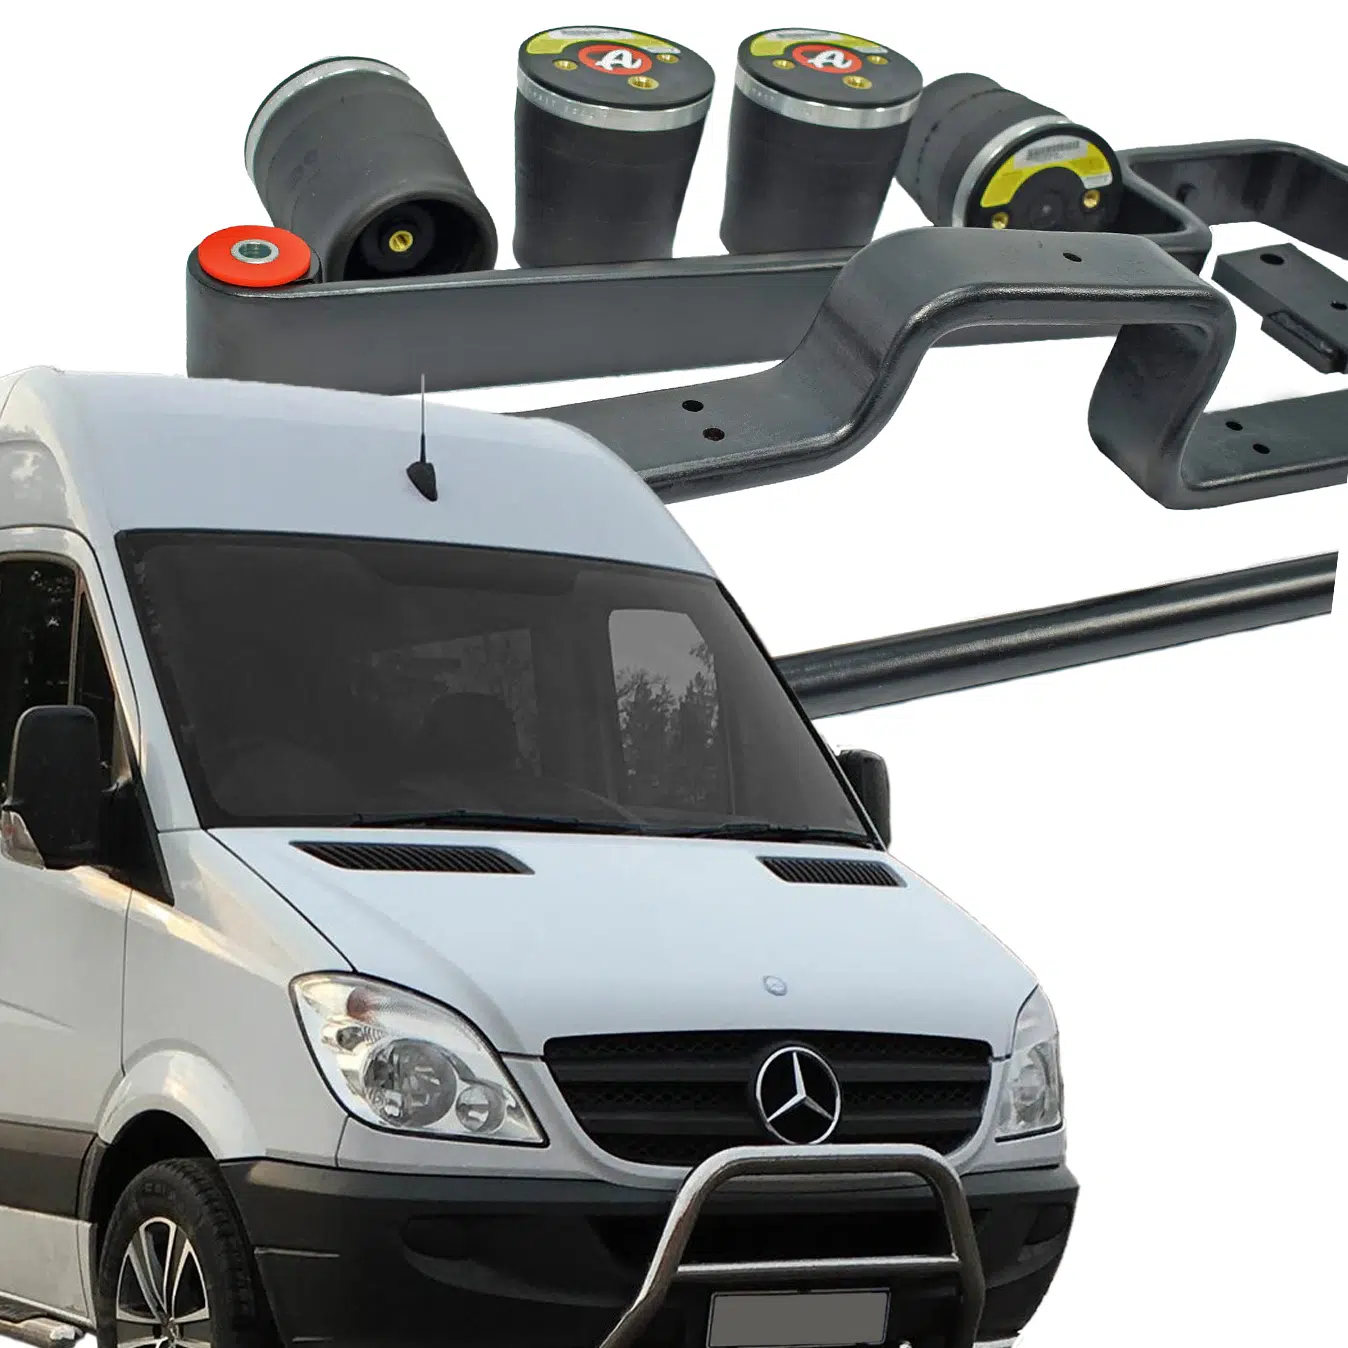 Mercedes sprinter in front of air suspension kit